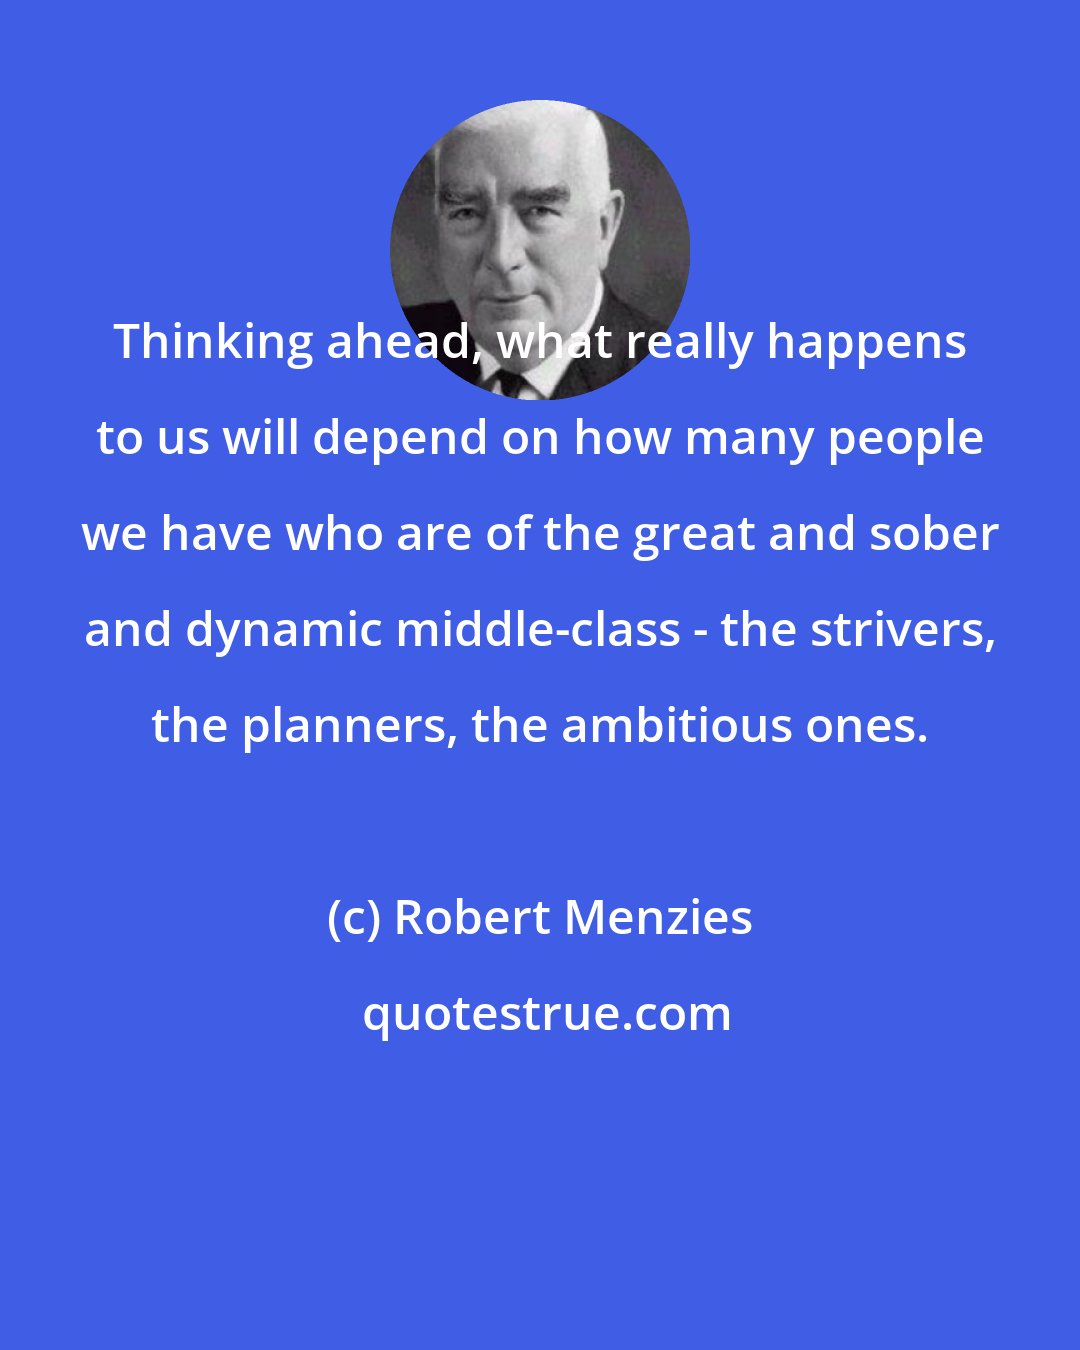 Robert Menzies: Thinking ahead, what really happens to us will depend on how many people we have who are of the great and sober and dynamic middle-class - the strivers, the planners, the ambitious ones.